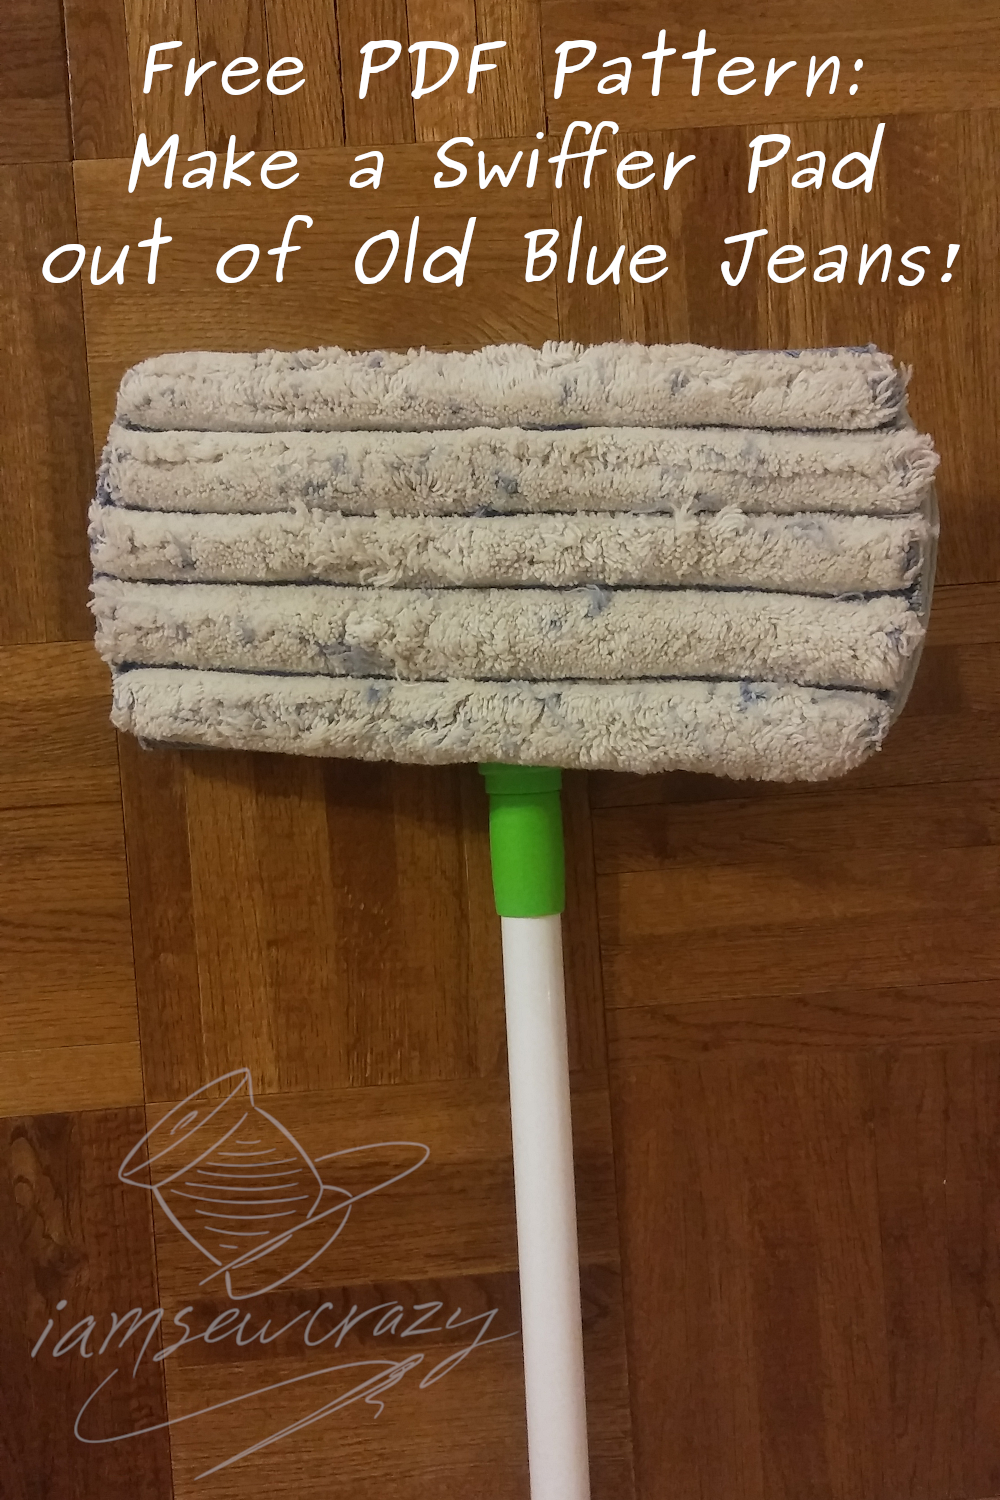 swiffer sweeper with diy cover on parquet wood floor with text overlay: free printable PDF pattern: make a swiffer pad out of old blue jeans!